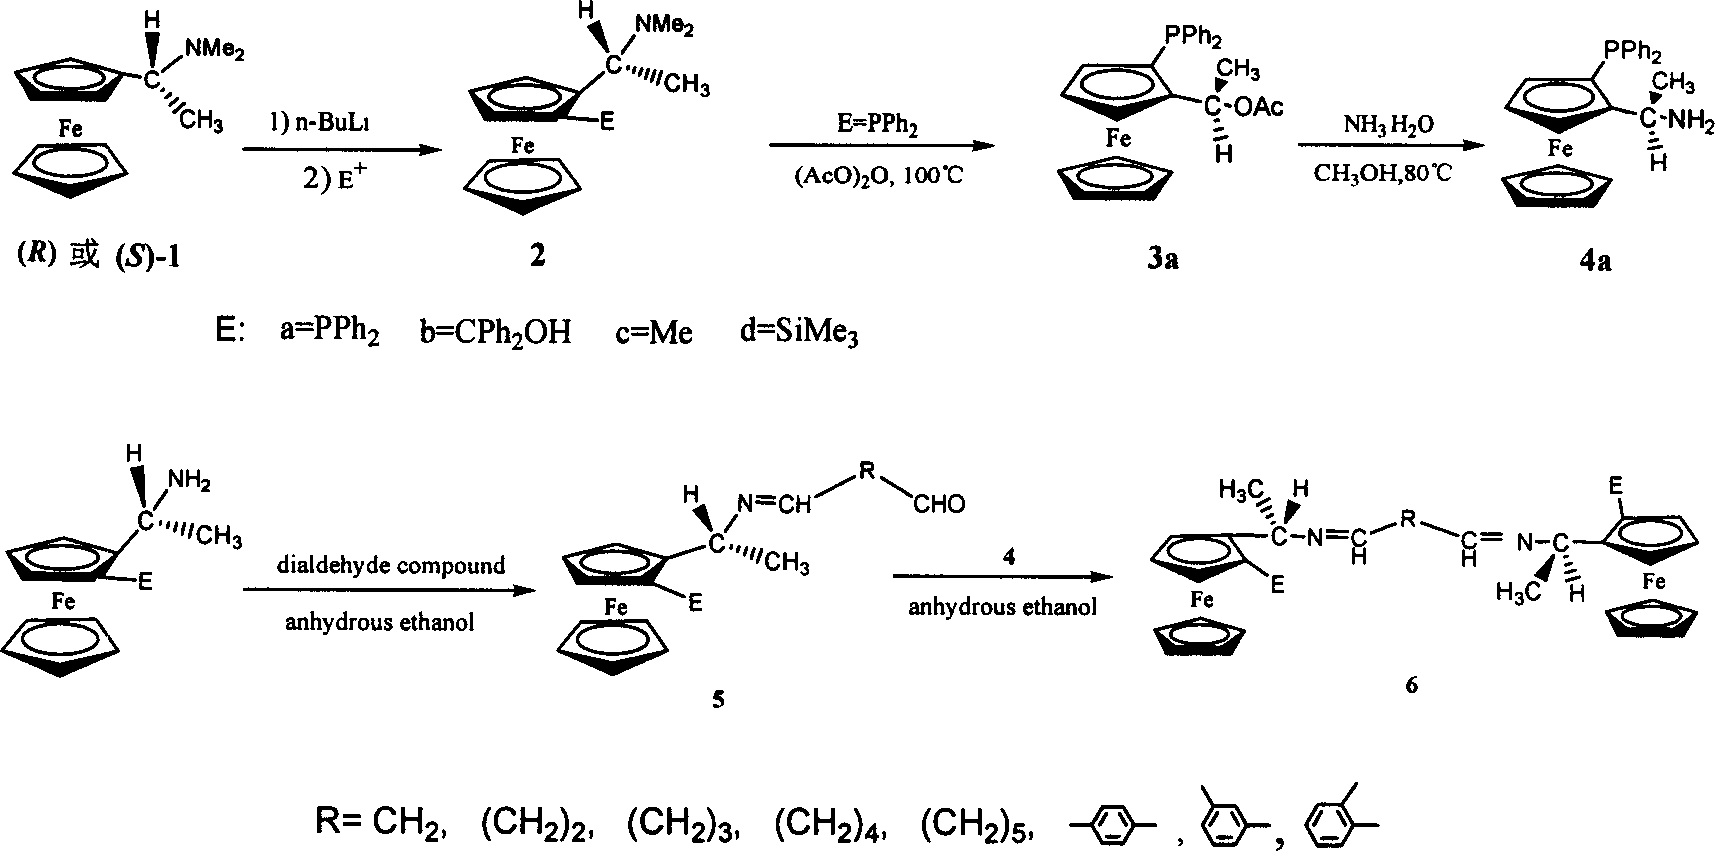 Method for synthesizing di-ferrocene phosphine diimine structure connected with aliphatic series and benzene ring